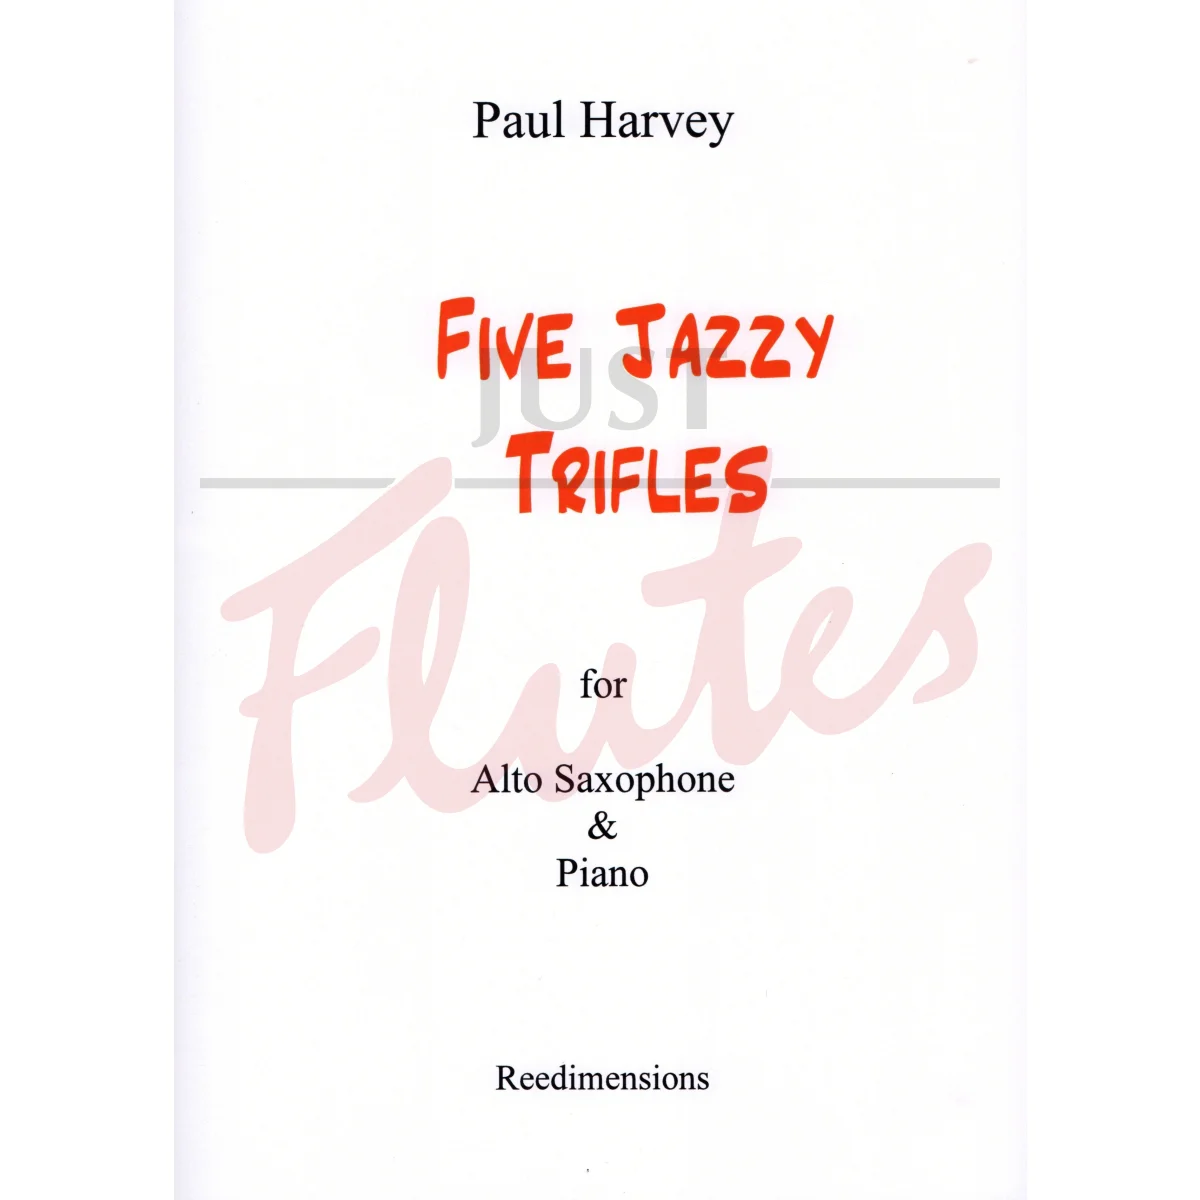 Five Jazzy Trifles for Alto Saxophone and Piano